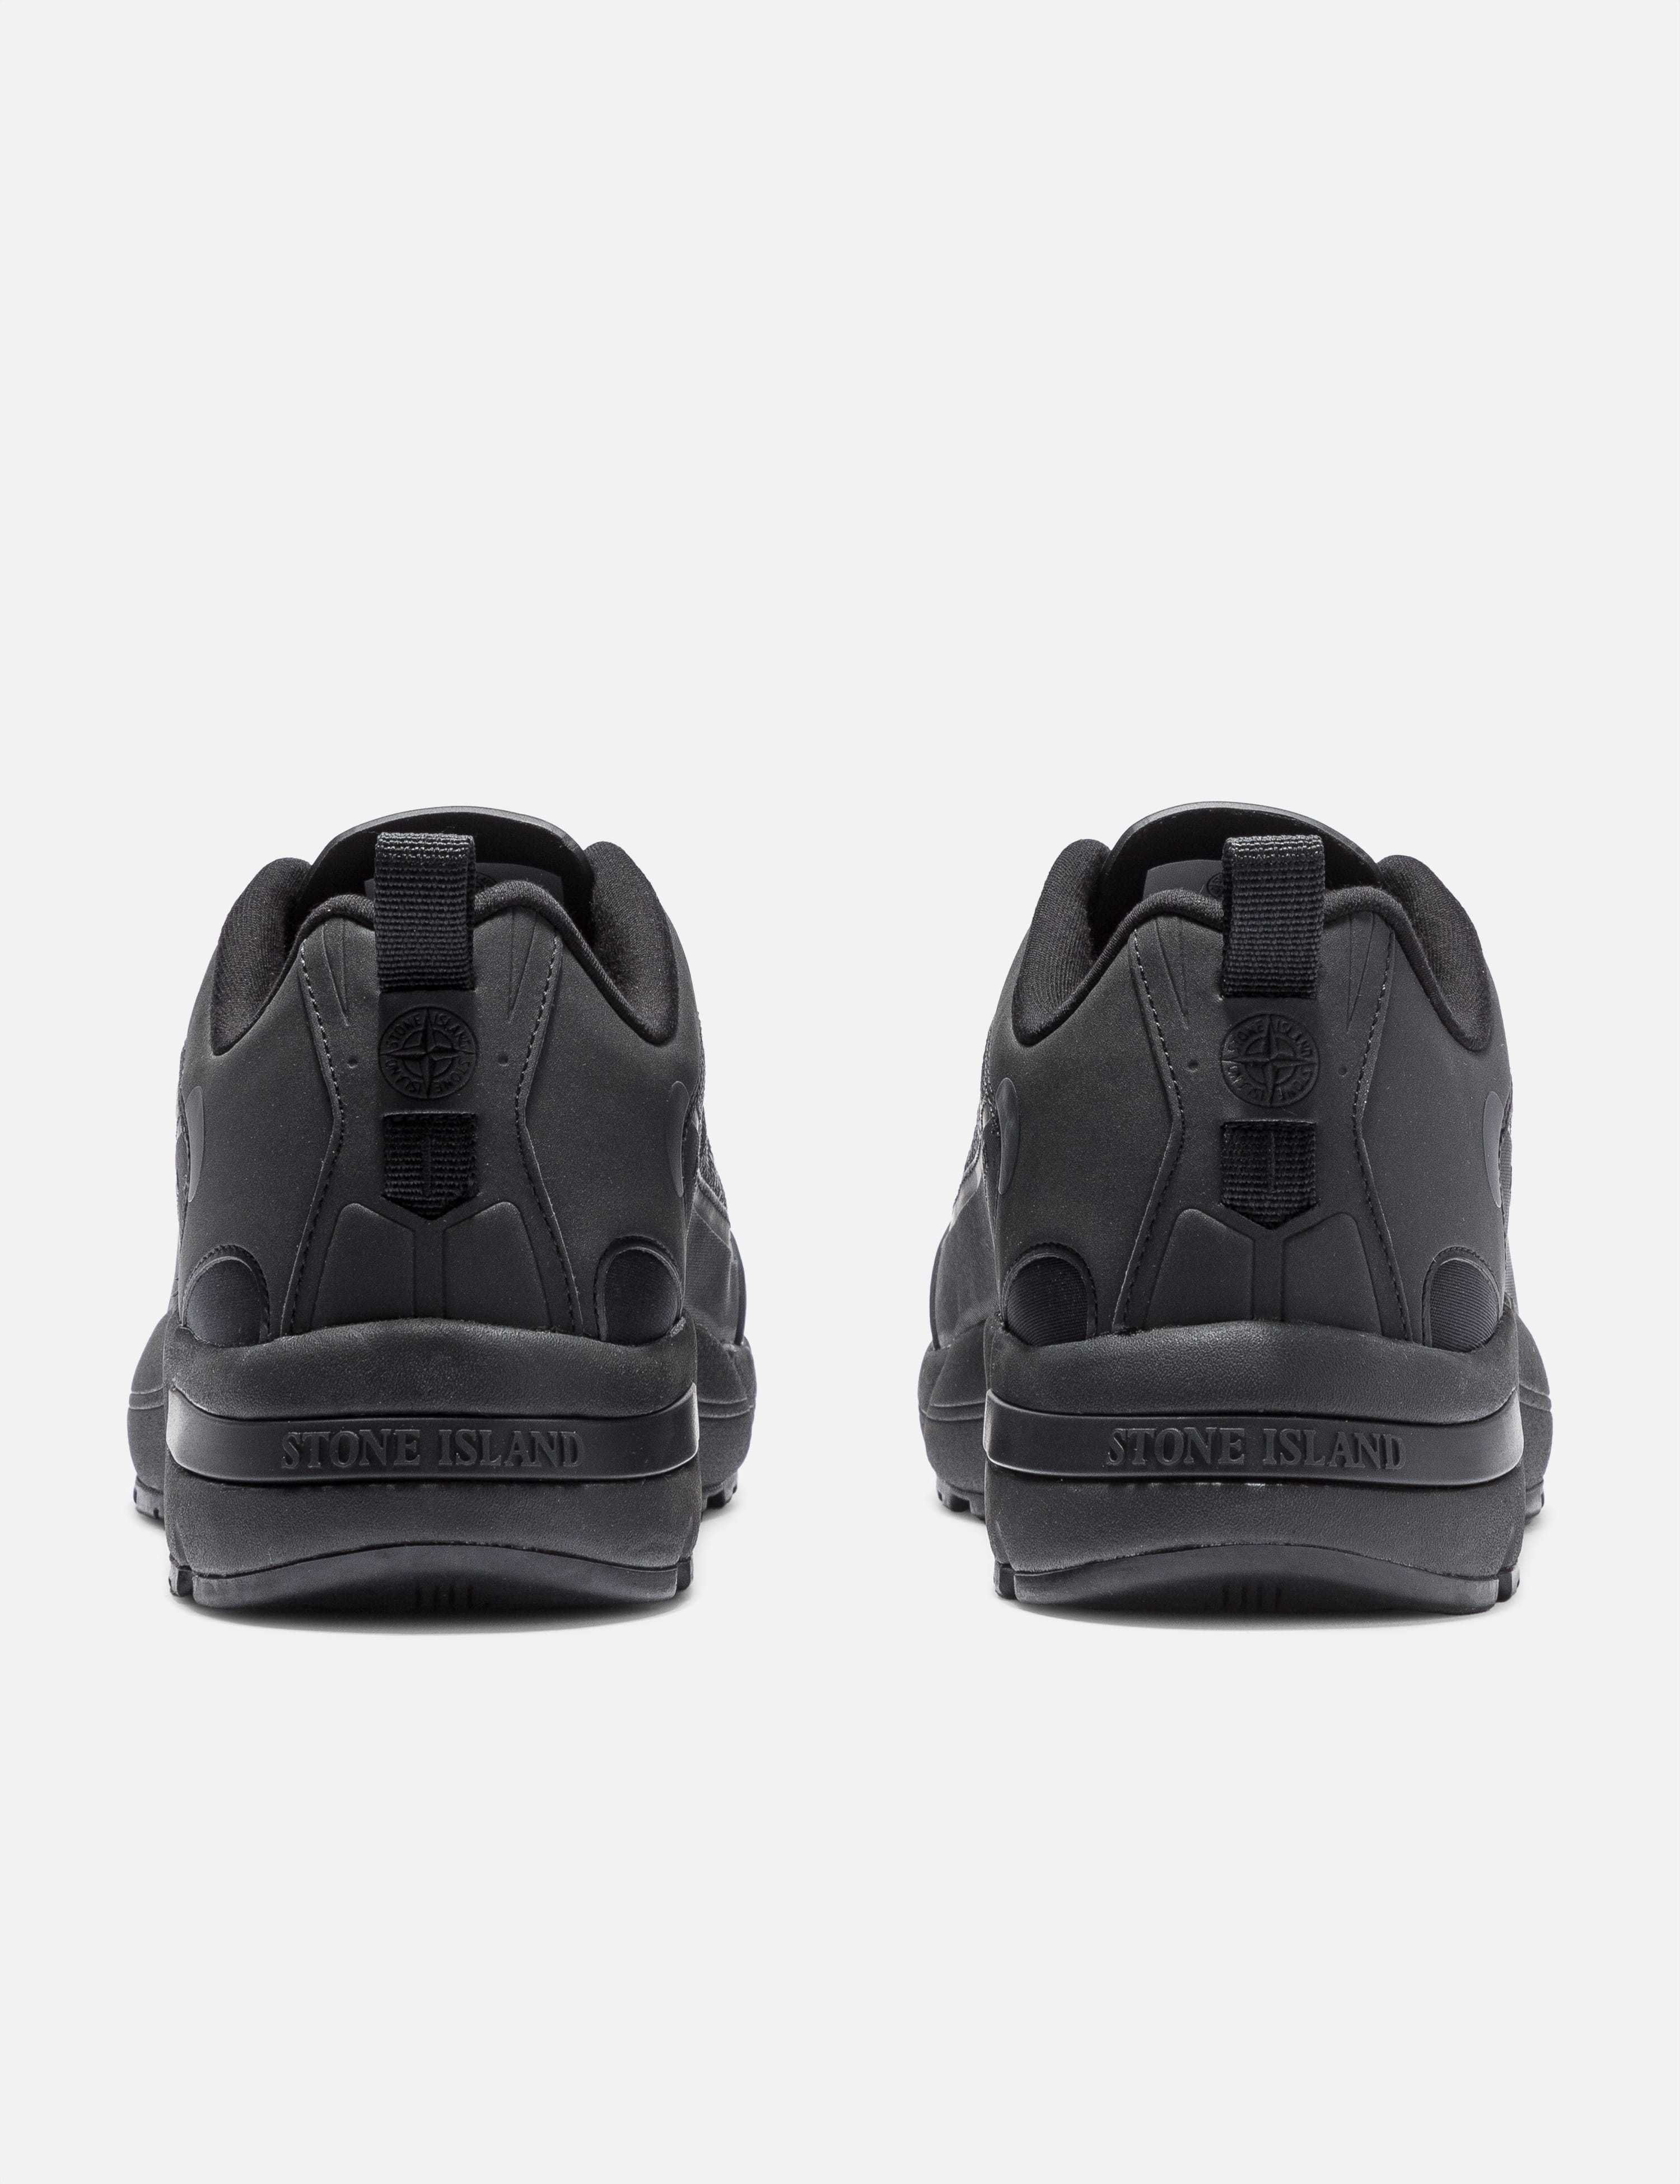 Stone Island Trainers | Flannels